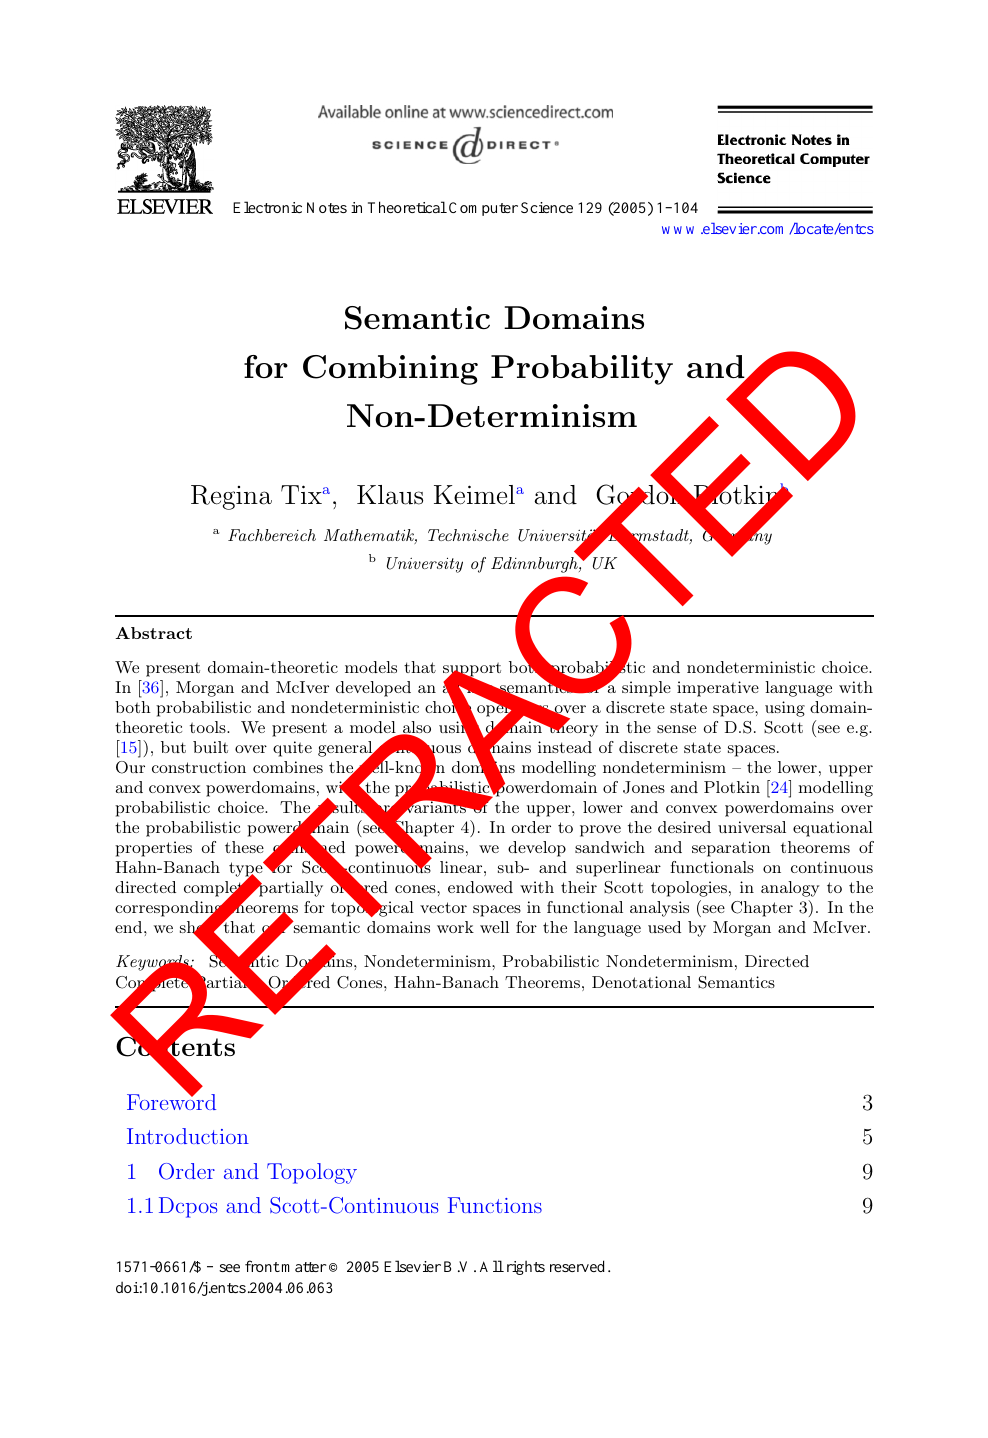 Retracted Semantic Domains For Combining Probability And Non Determinism Topic Of Research Paper In Computer And Information Sciences Download Scholarly Article Pdf And Read For Free On Cyberleninka Open Science Hub